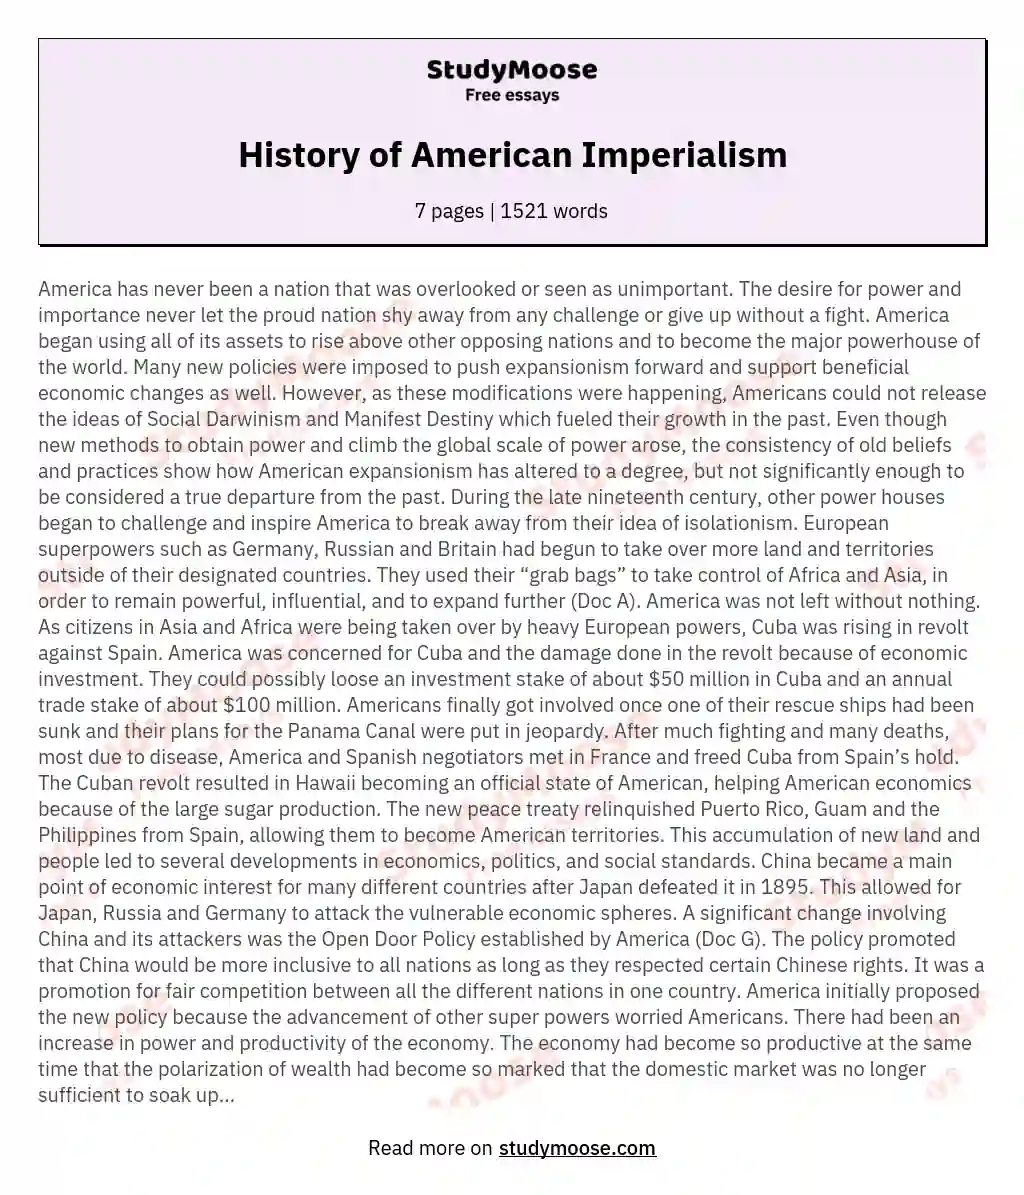 History of American Imperialism essay